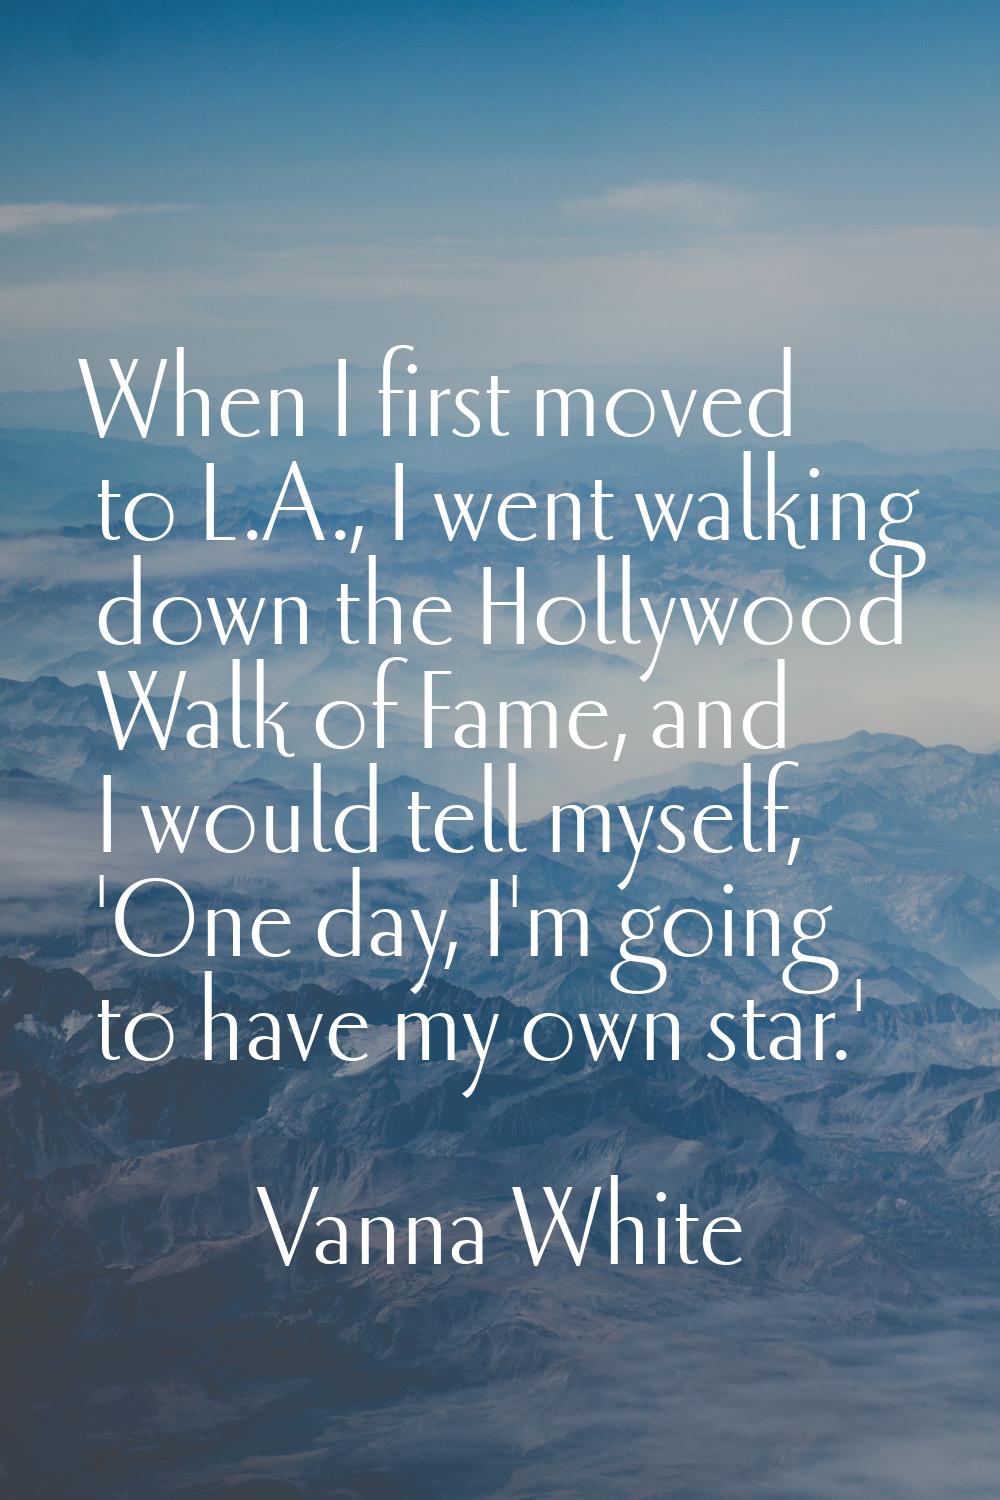 When I first moved to L.A., I went walking down the Hollywood Walk of Fame, and I would tell myself